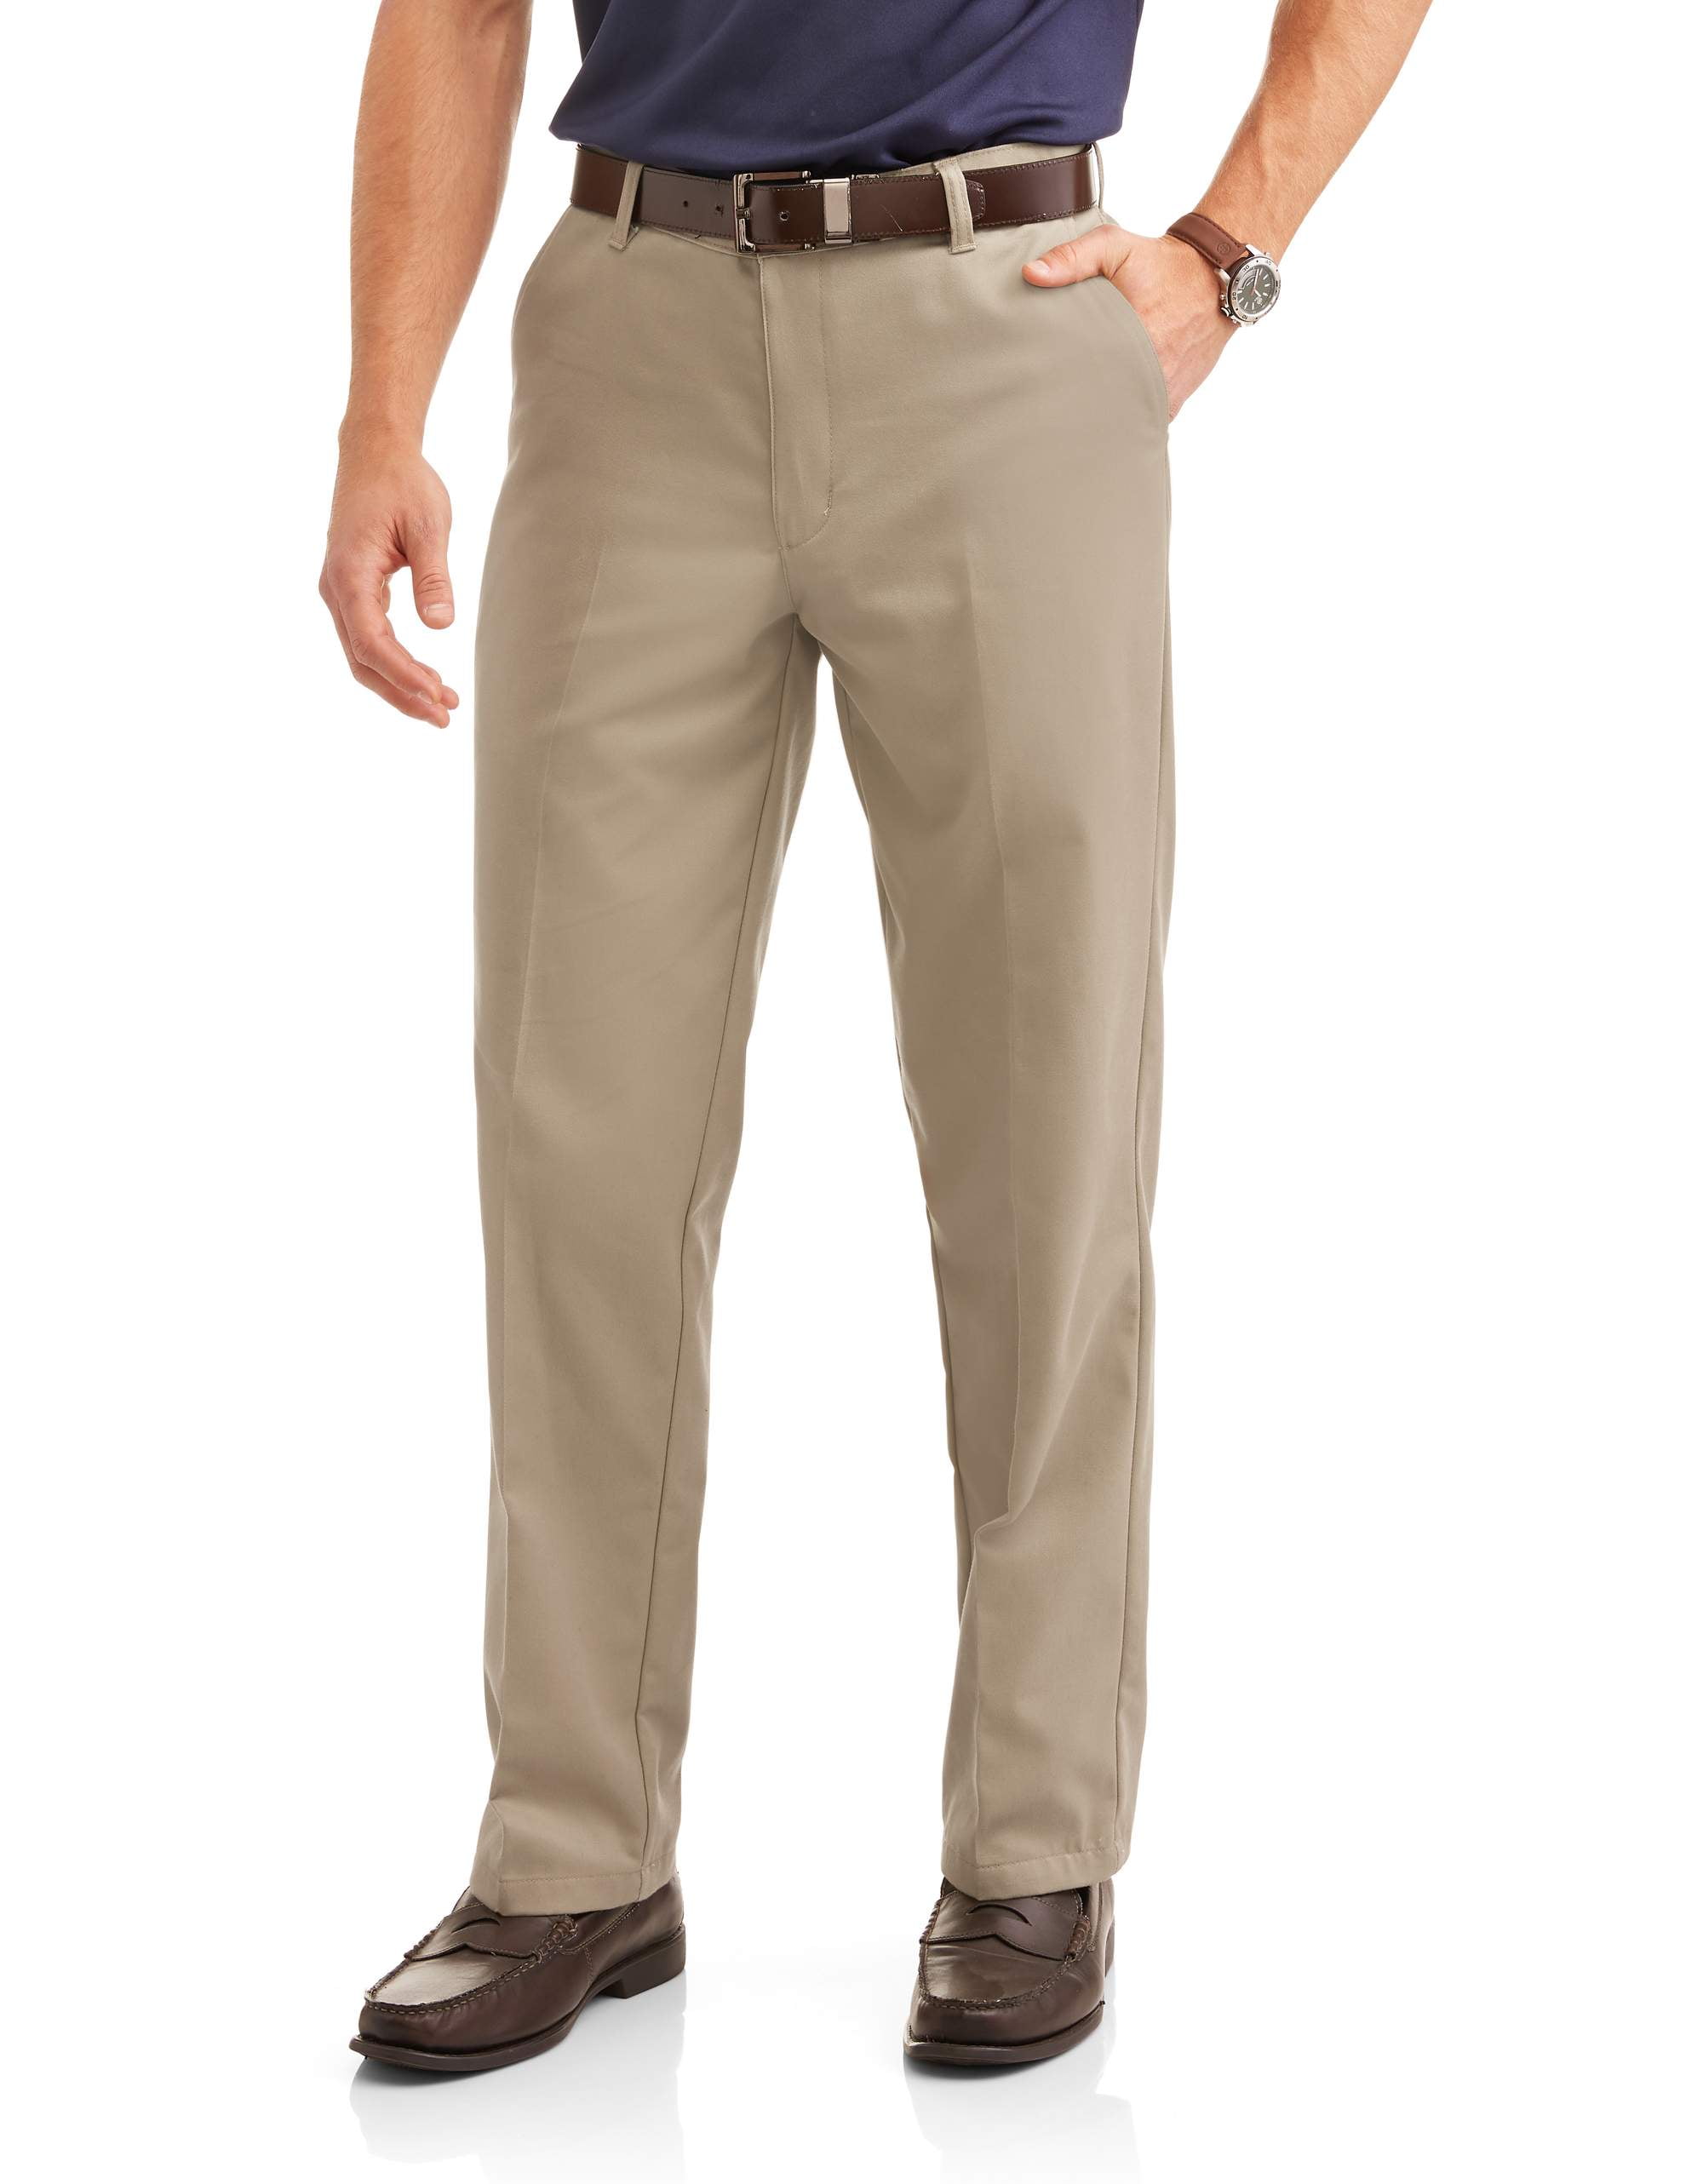 Lands End Big And Tall Pants Online  playgrownedcom 1690194234